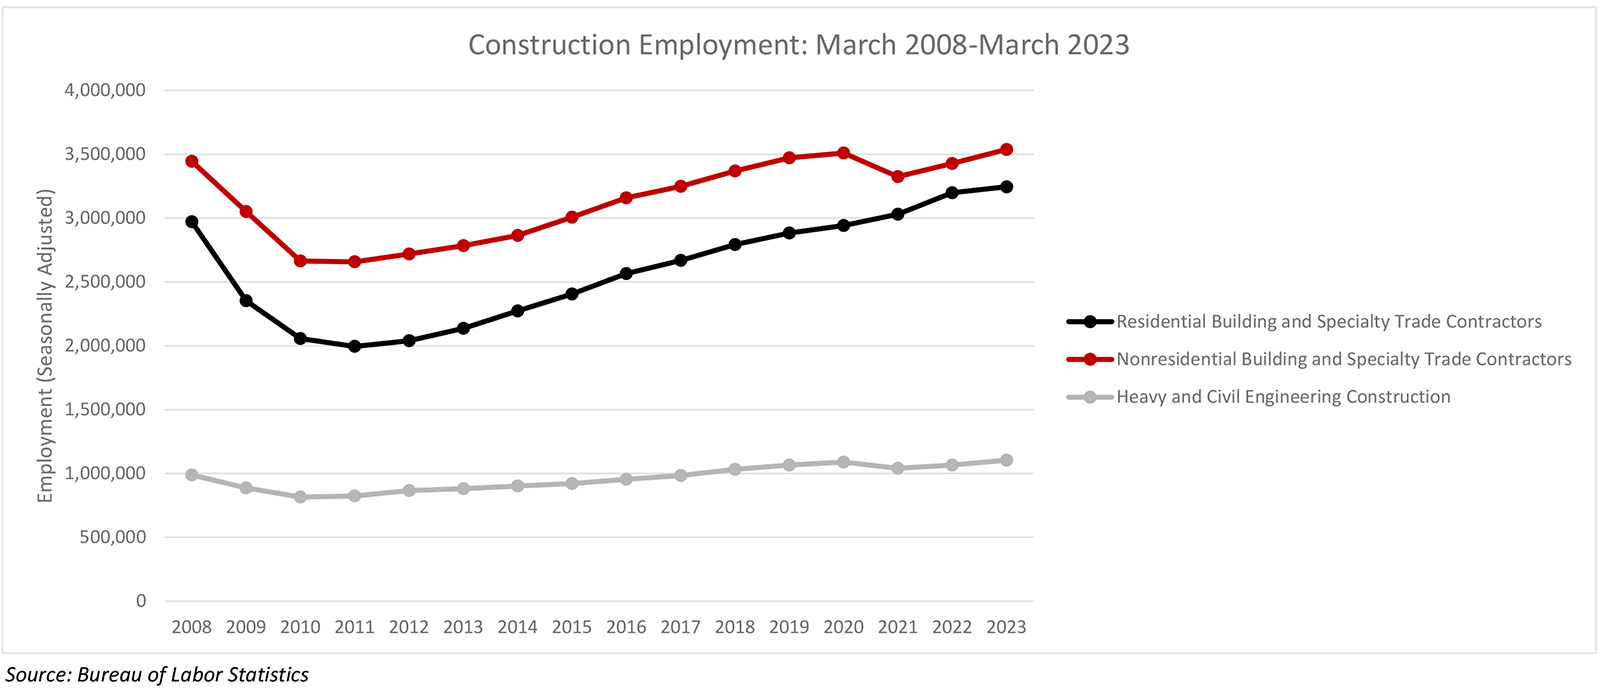 Nonresidential Construction Employment Decreased in March